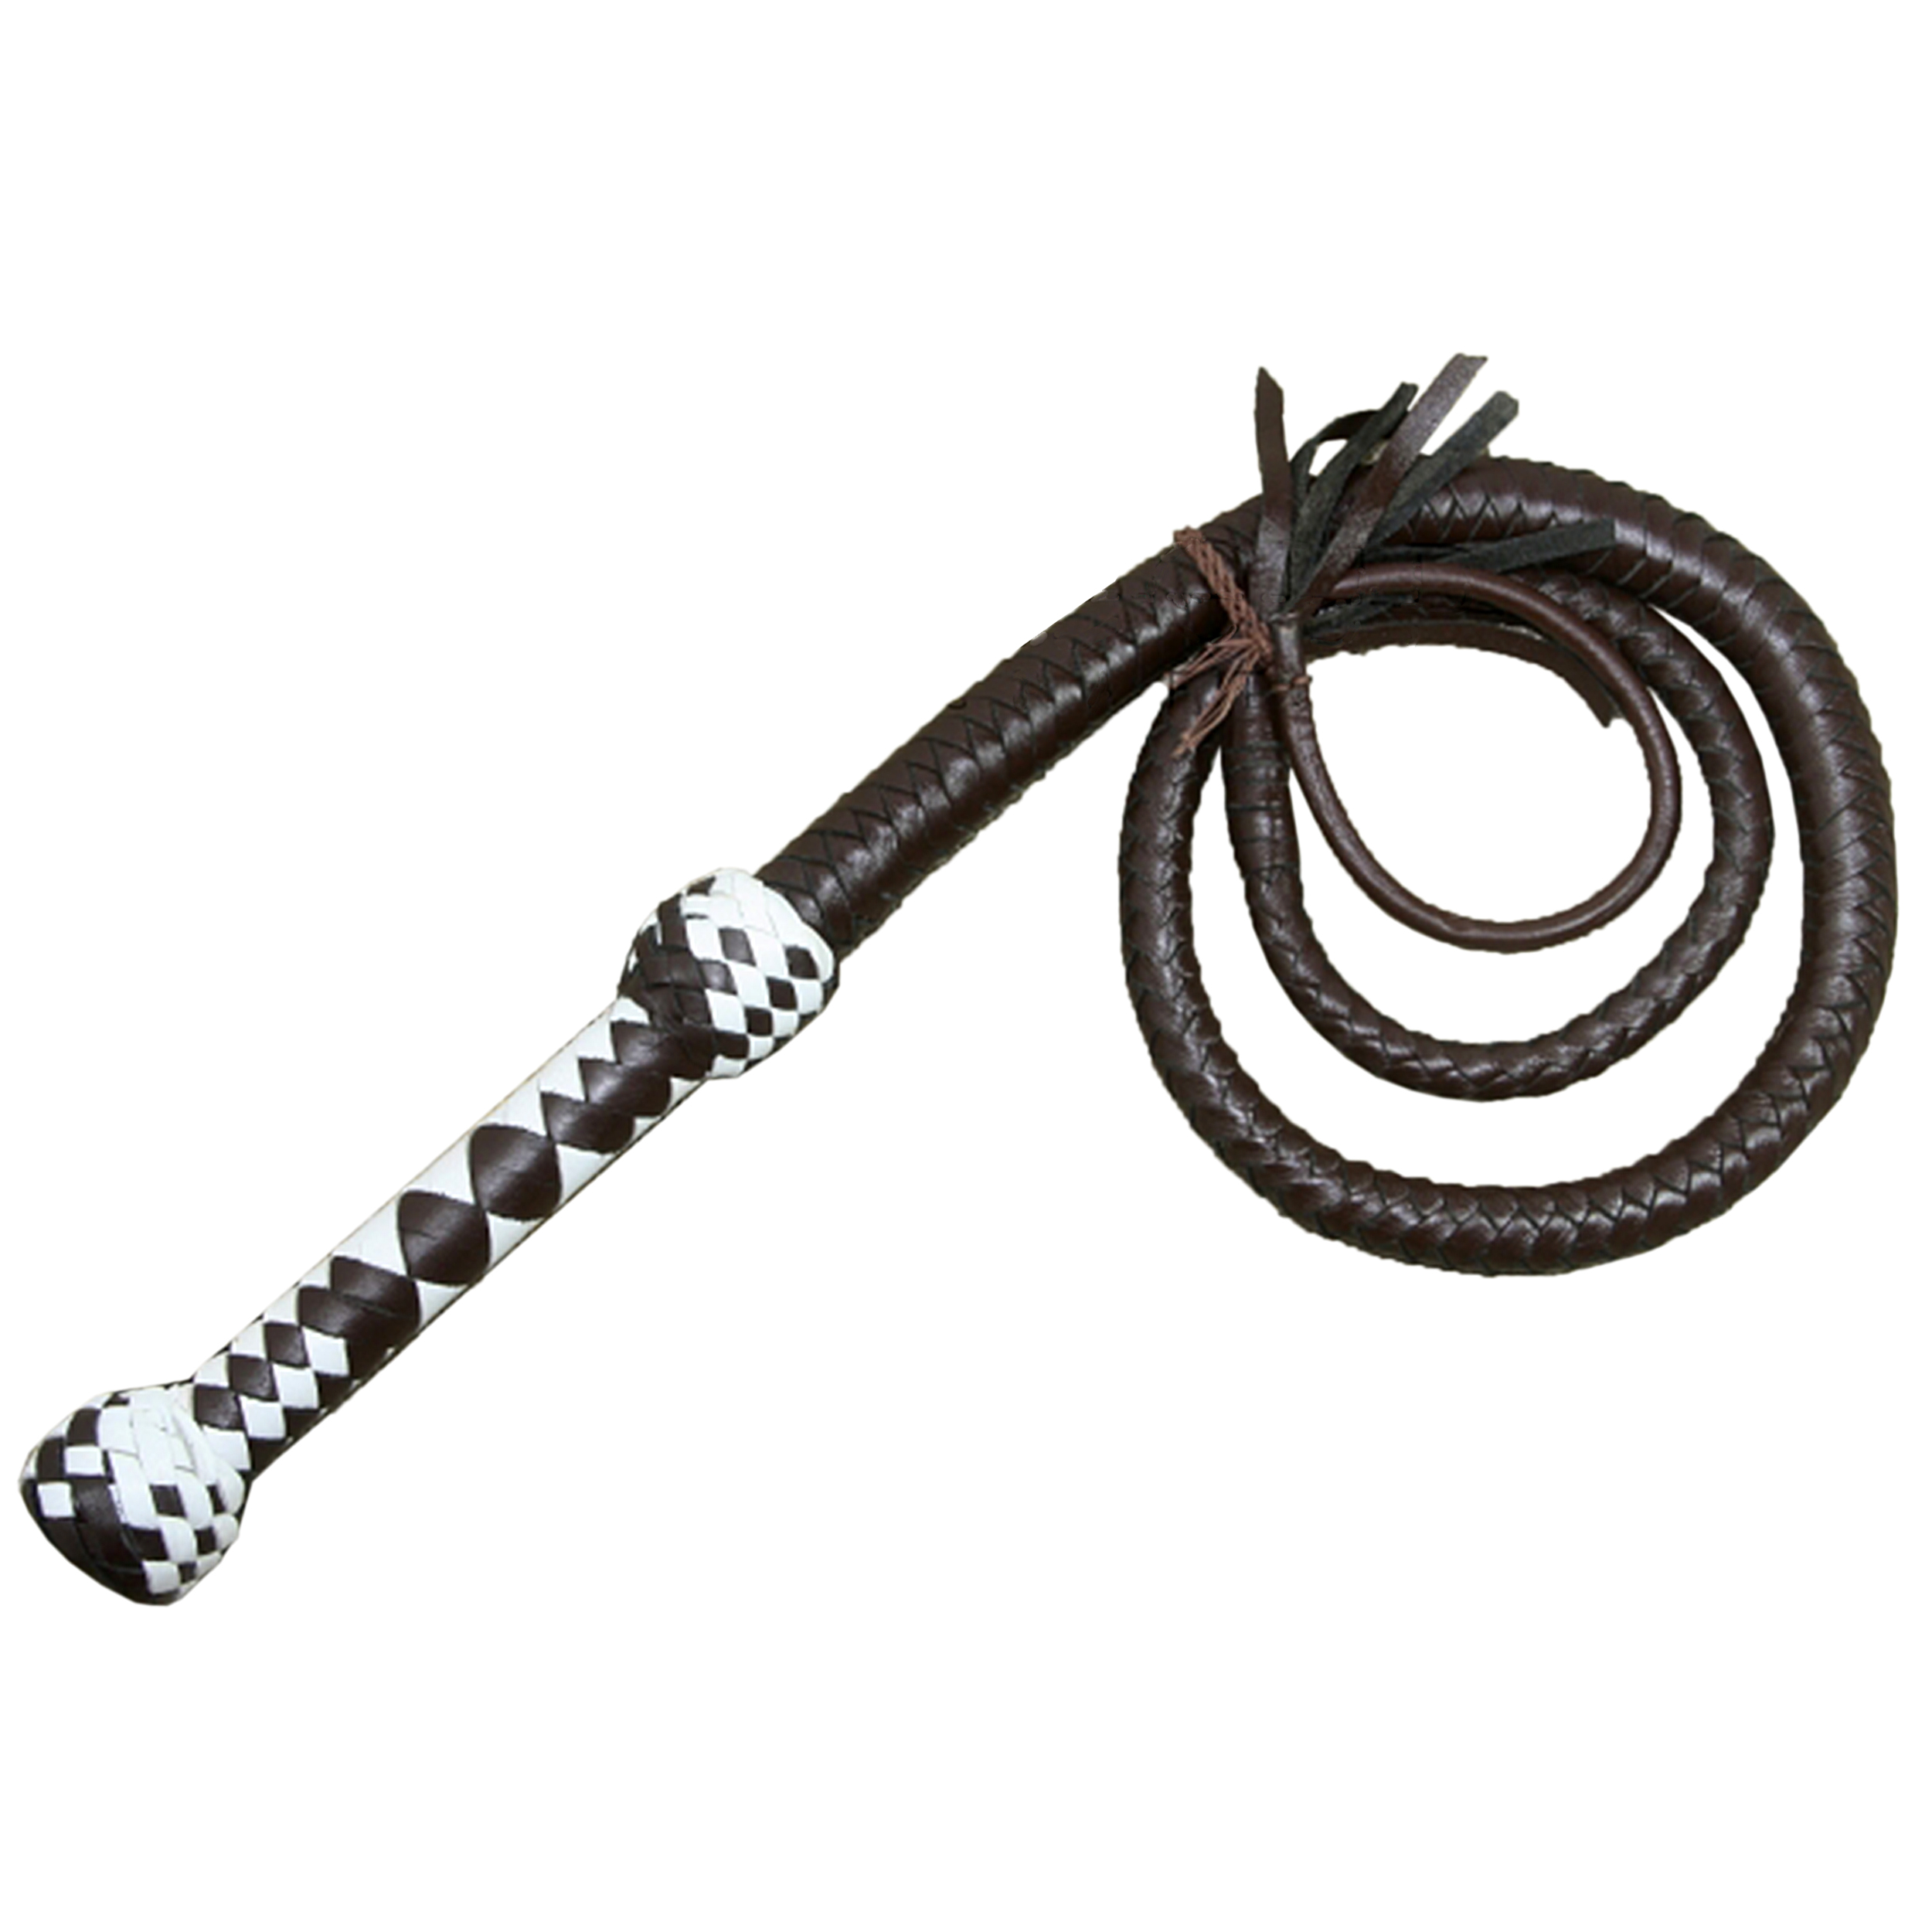 Indiana Jones Style 8 Foot 8 Plait Tan Brown Leather Bullwhip Real Genuine Cowhide Leather Bull Whip